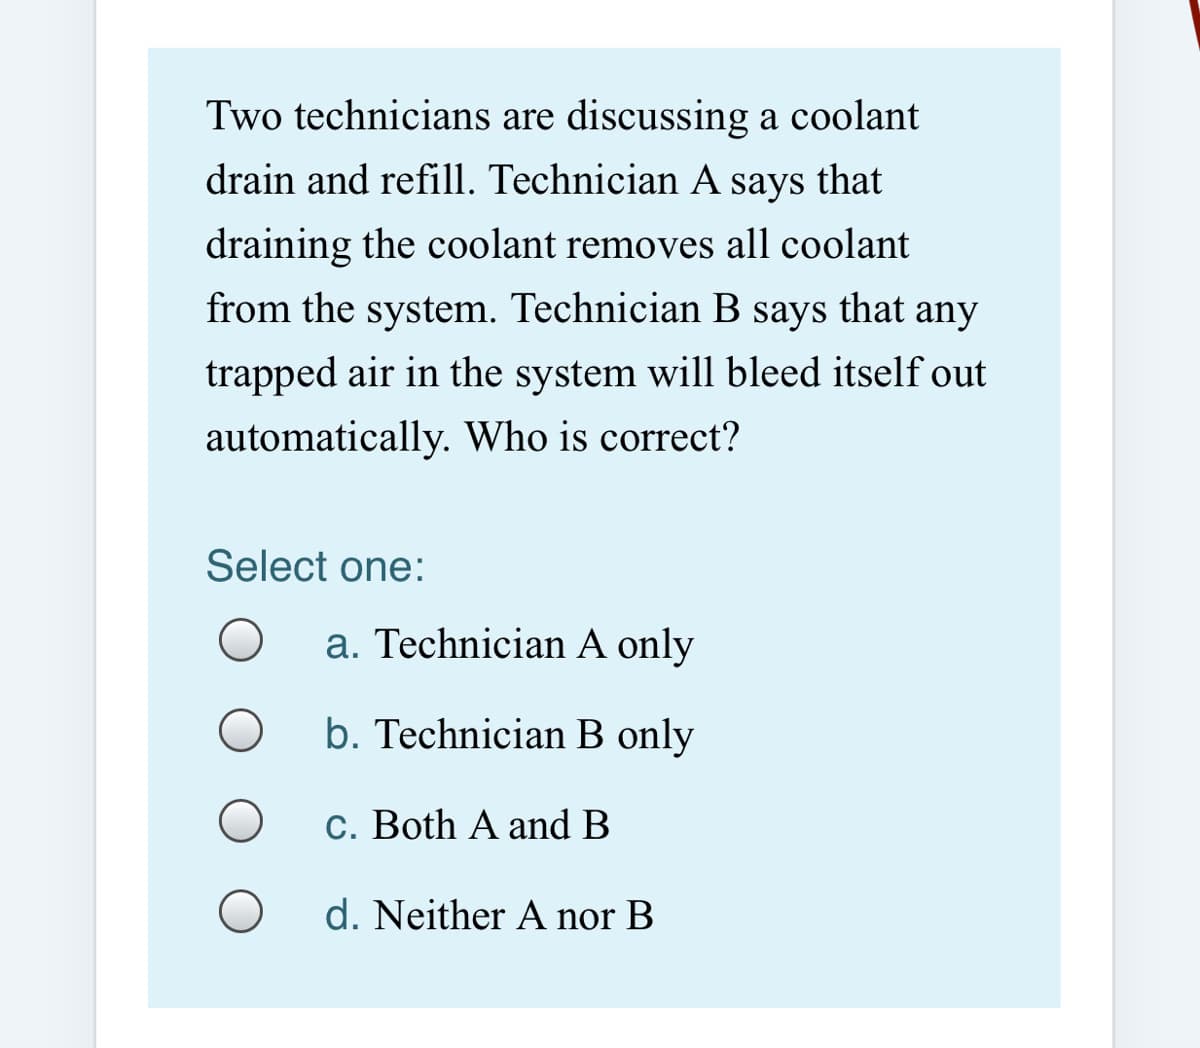 Two technicians are discussing a coolant
drain and refill. Technician A says that
draining the coolant removes all coolant
from the system. Technician B says that any
trapped air in the system will bleed itself out
automatically. Who is correct?
Select one:
a. Technician A only
b. Technician B only
c. Both A and B
d. Neither A nor B
